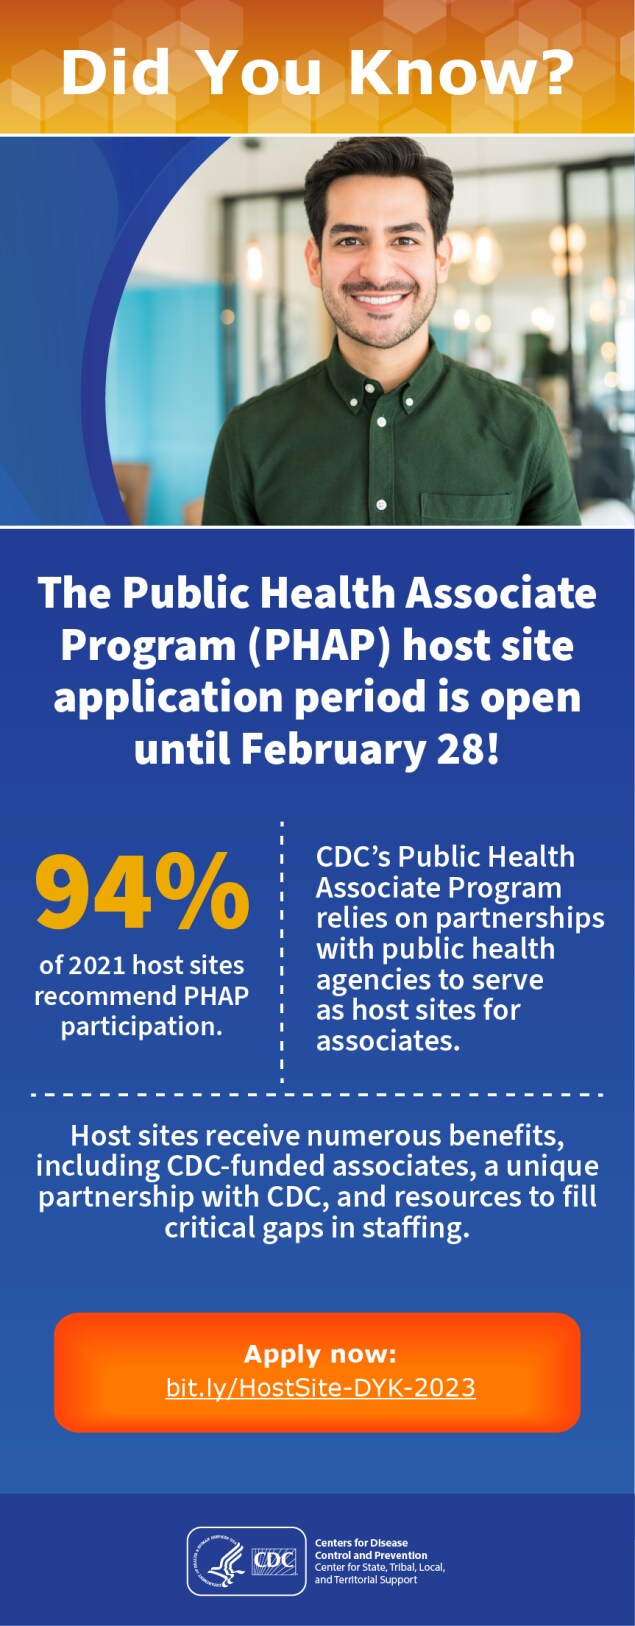 An infographic titled Did You Know? Text says: The Public Health Associate Program (PHAP) host site application period is open until February 28! 94% of 2021 host sites recommend PHAP participation. CDC’s Public Health Associate Program relies on partnerships with public health agencies to serve as host sites for associates. Host sites receive numerous benefits, including CDC-funded associates, a unique partnership with CDC, and resources to fill critical gaps in staffing. Apply now: bit.ly/HostSite-DYK-2023